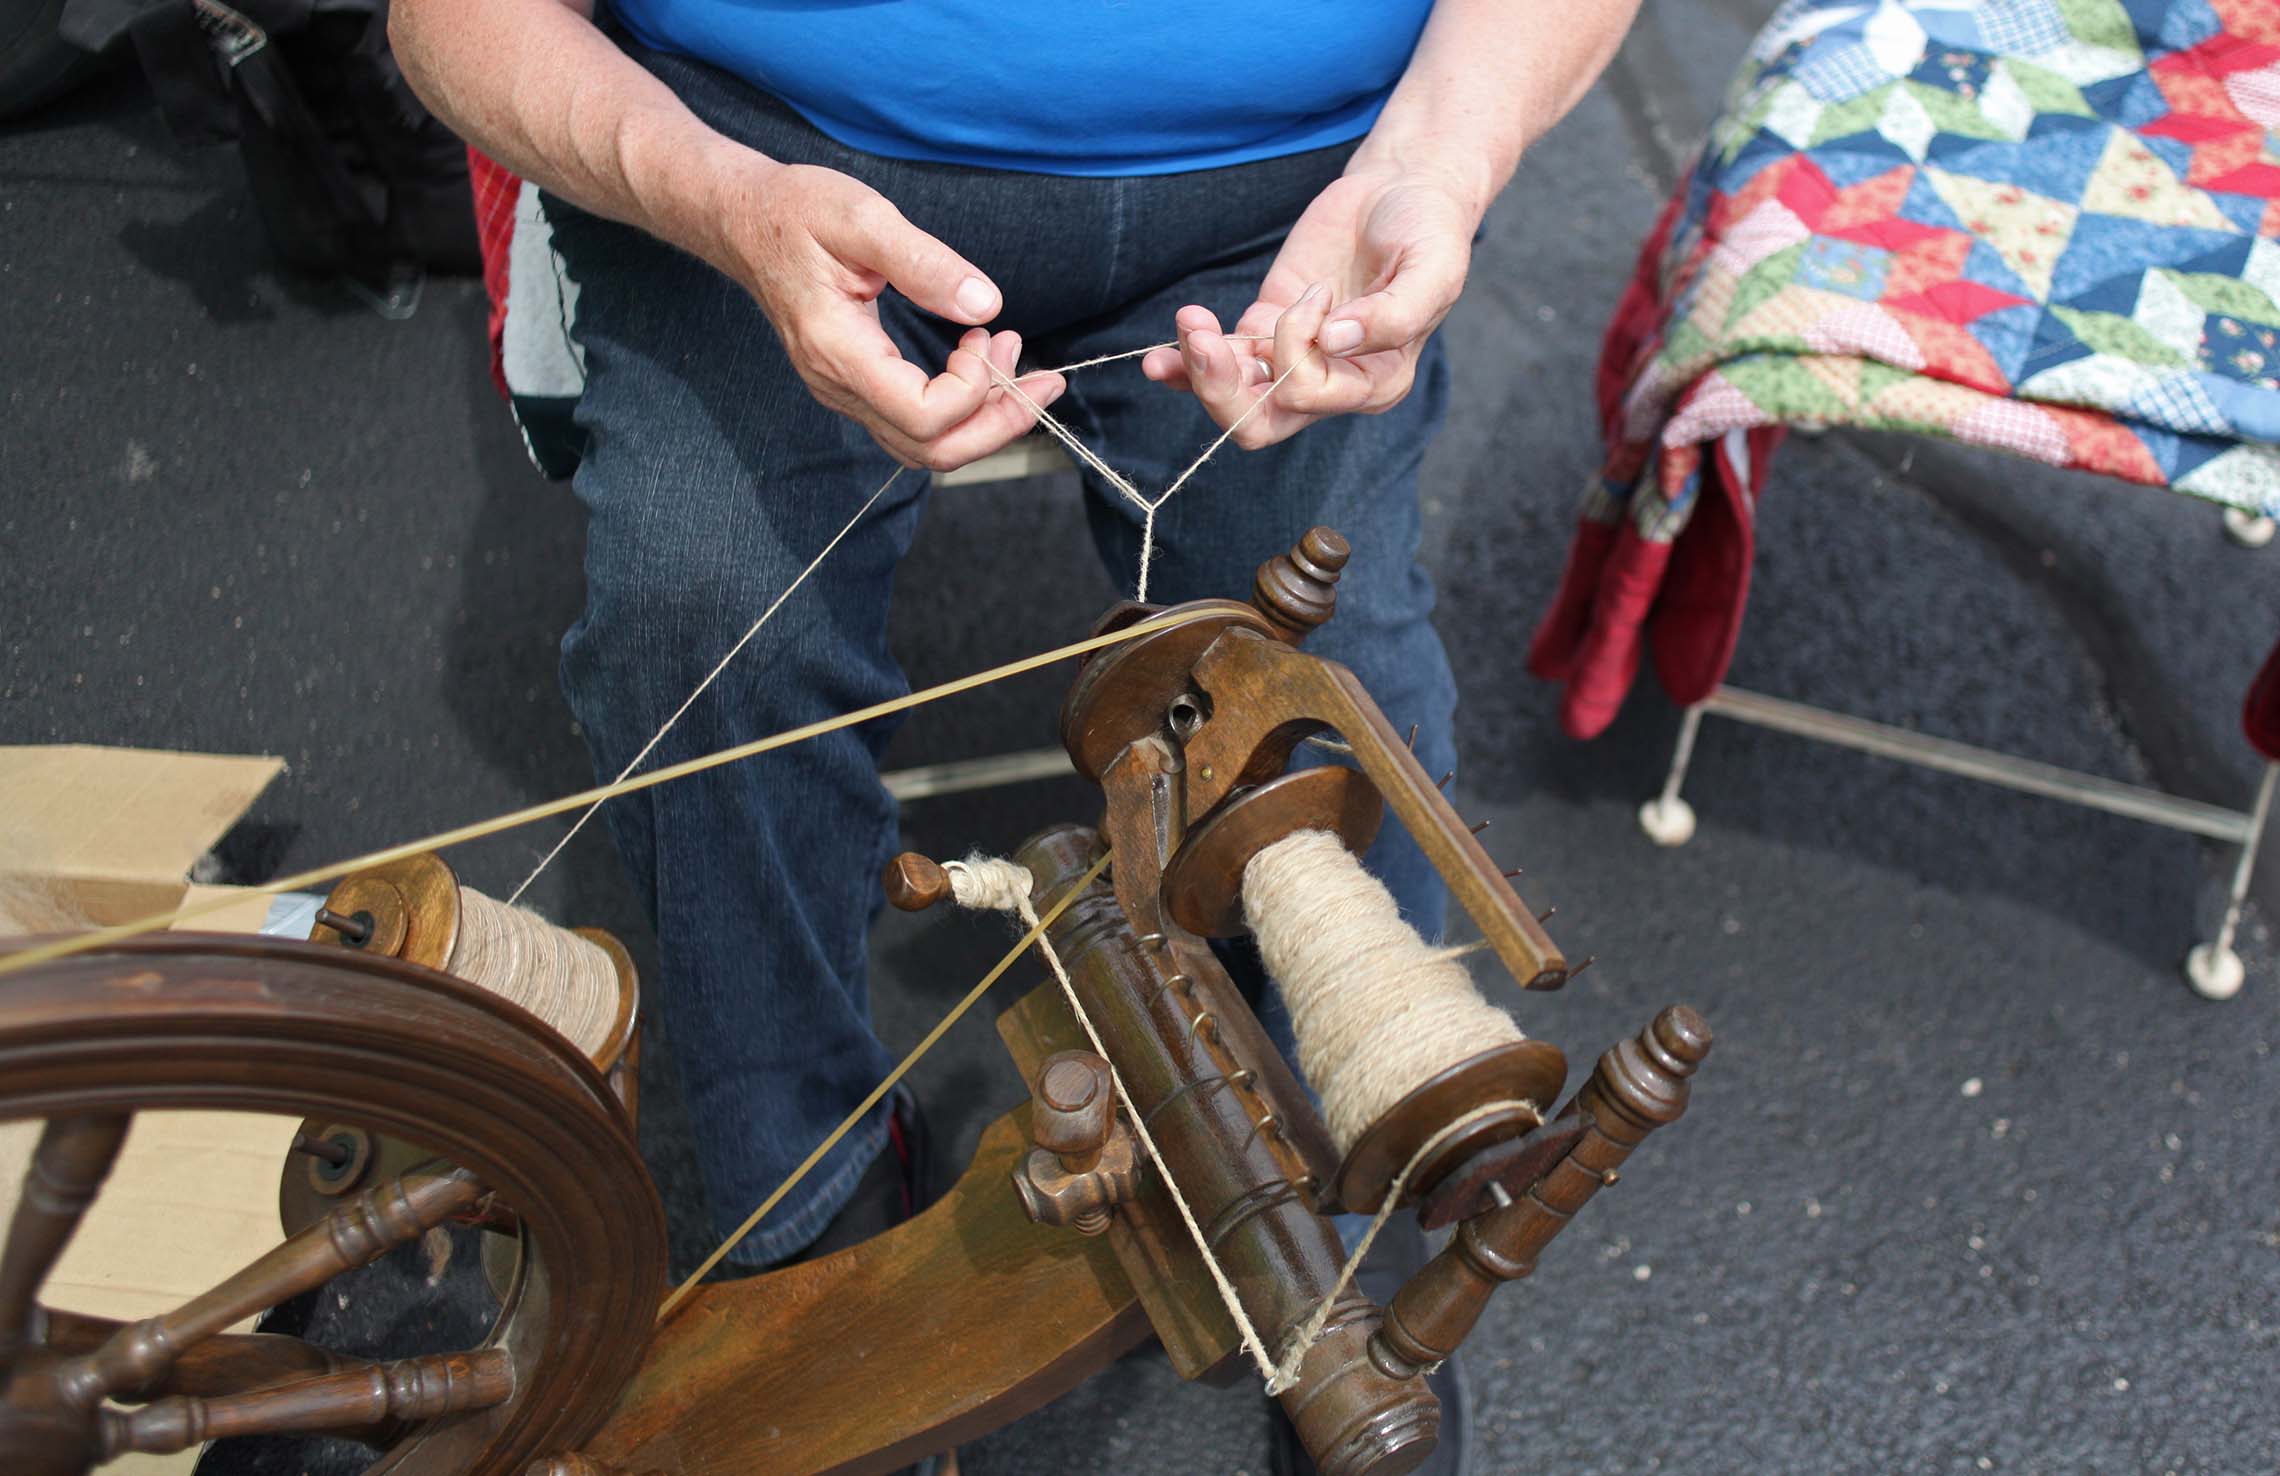  Rosie McHugh spins alpaca fiber into yarn Saturday during the Kankakee Farmers Market in downtown Kankakee. The alpaca fiber comes from the family farm and used to produce various items from yarn to socks and insoles. 